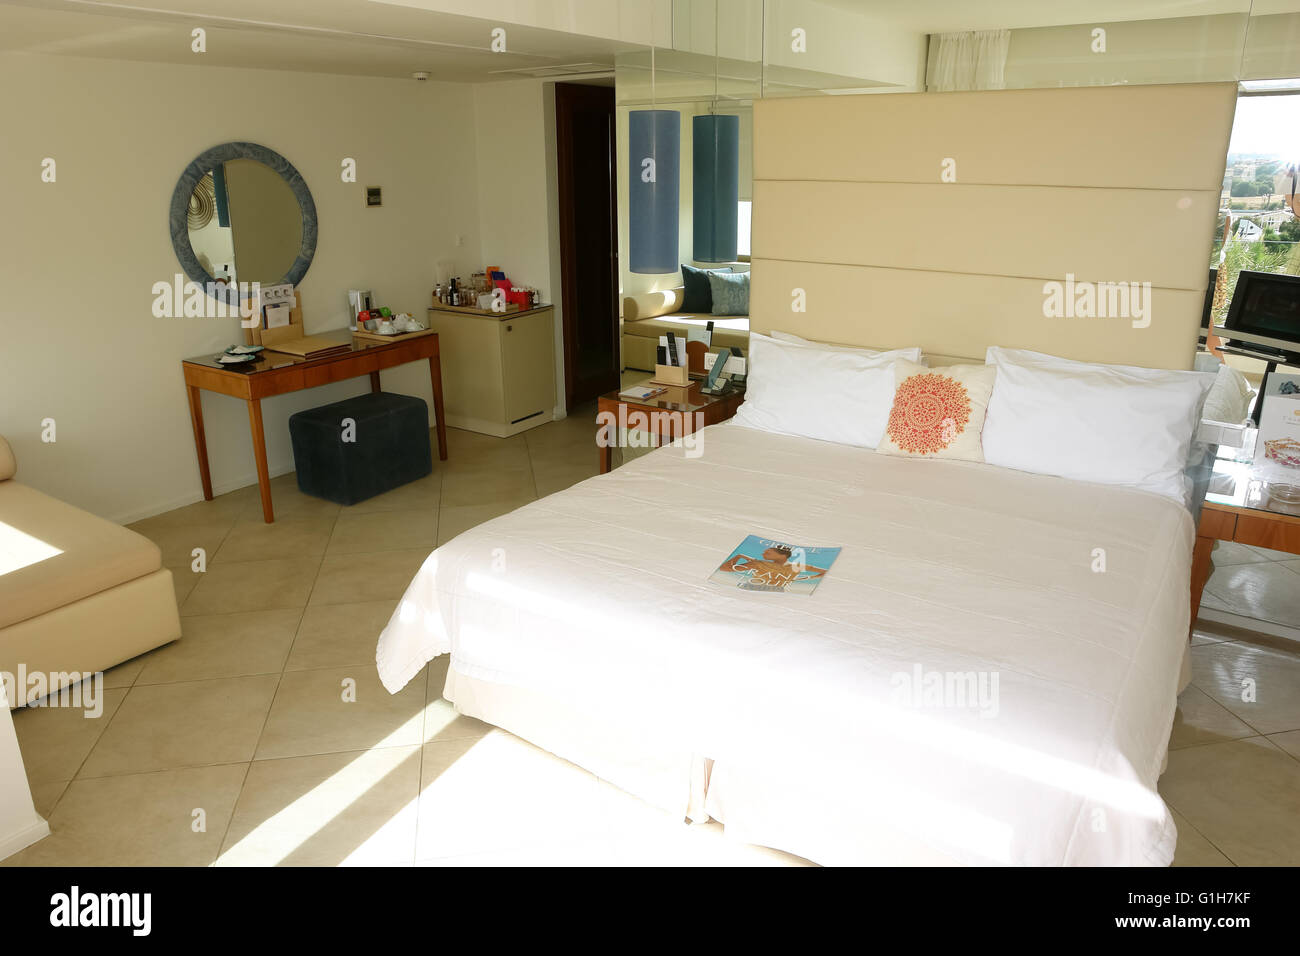 HERAKLION, CRETE, GREECE - MAY 13, 2014: The Interior room with big bed in modern building of luxury class hotel Stock Photo